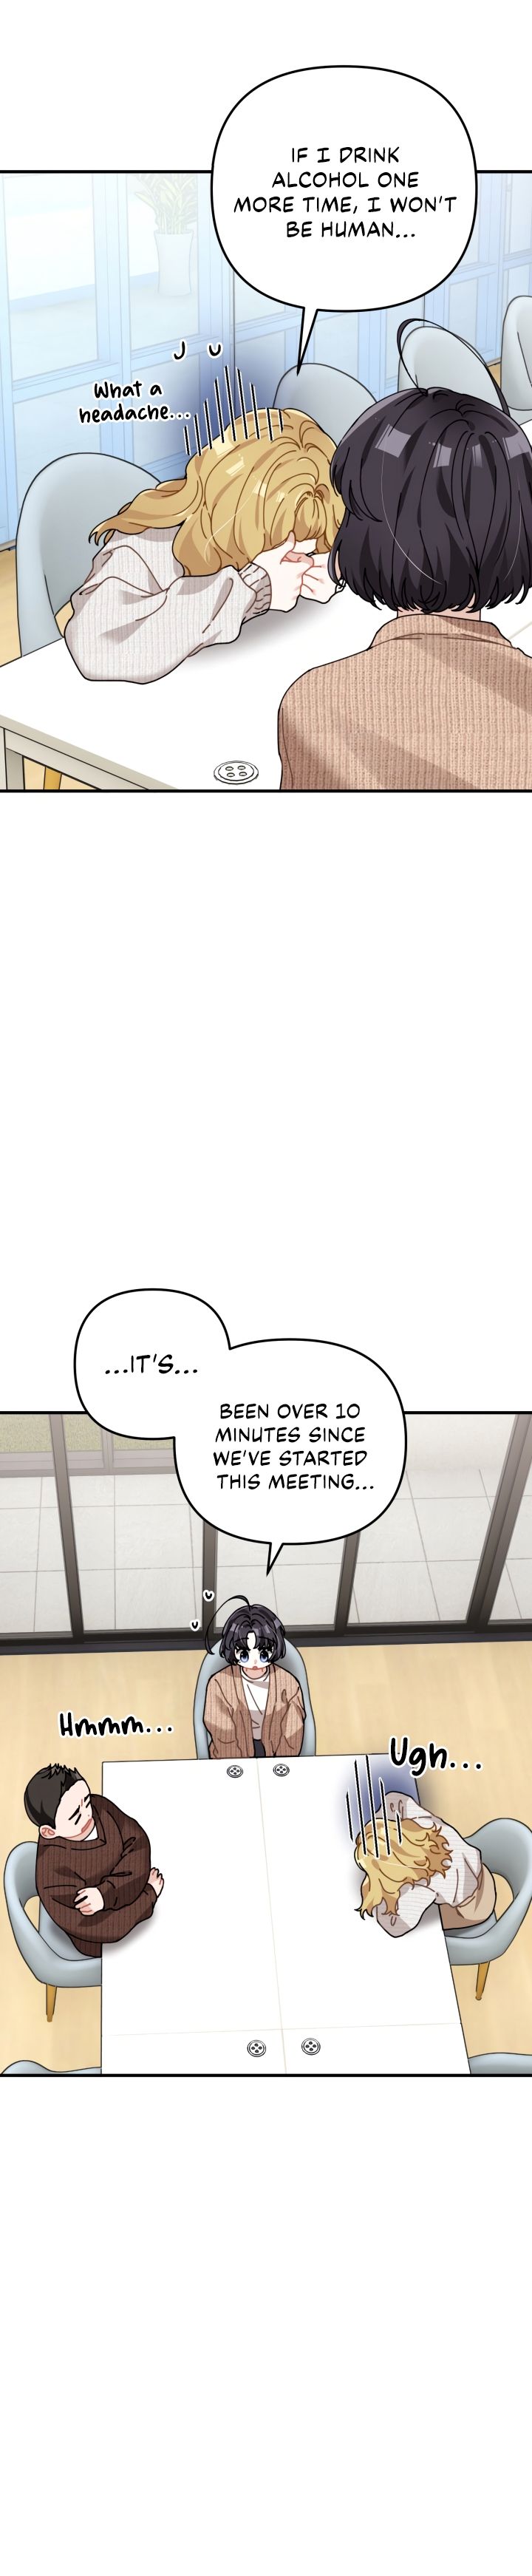 TWINCOGNITO ROMANCE Chapter 11 - Page 18